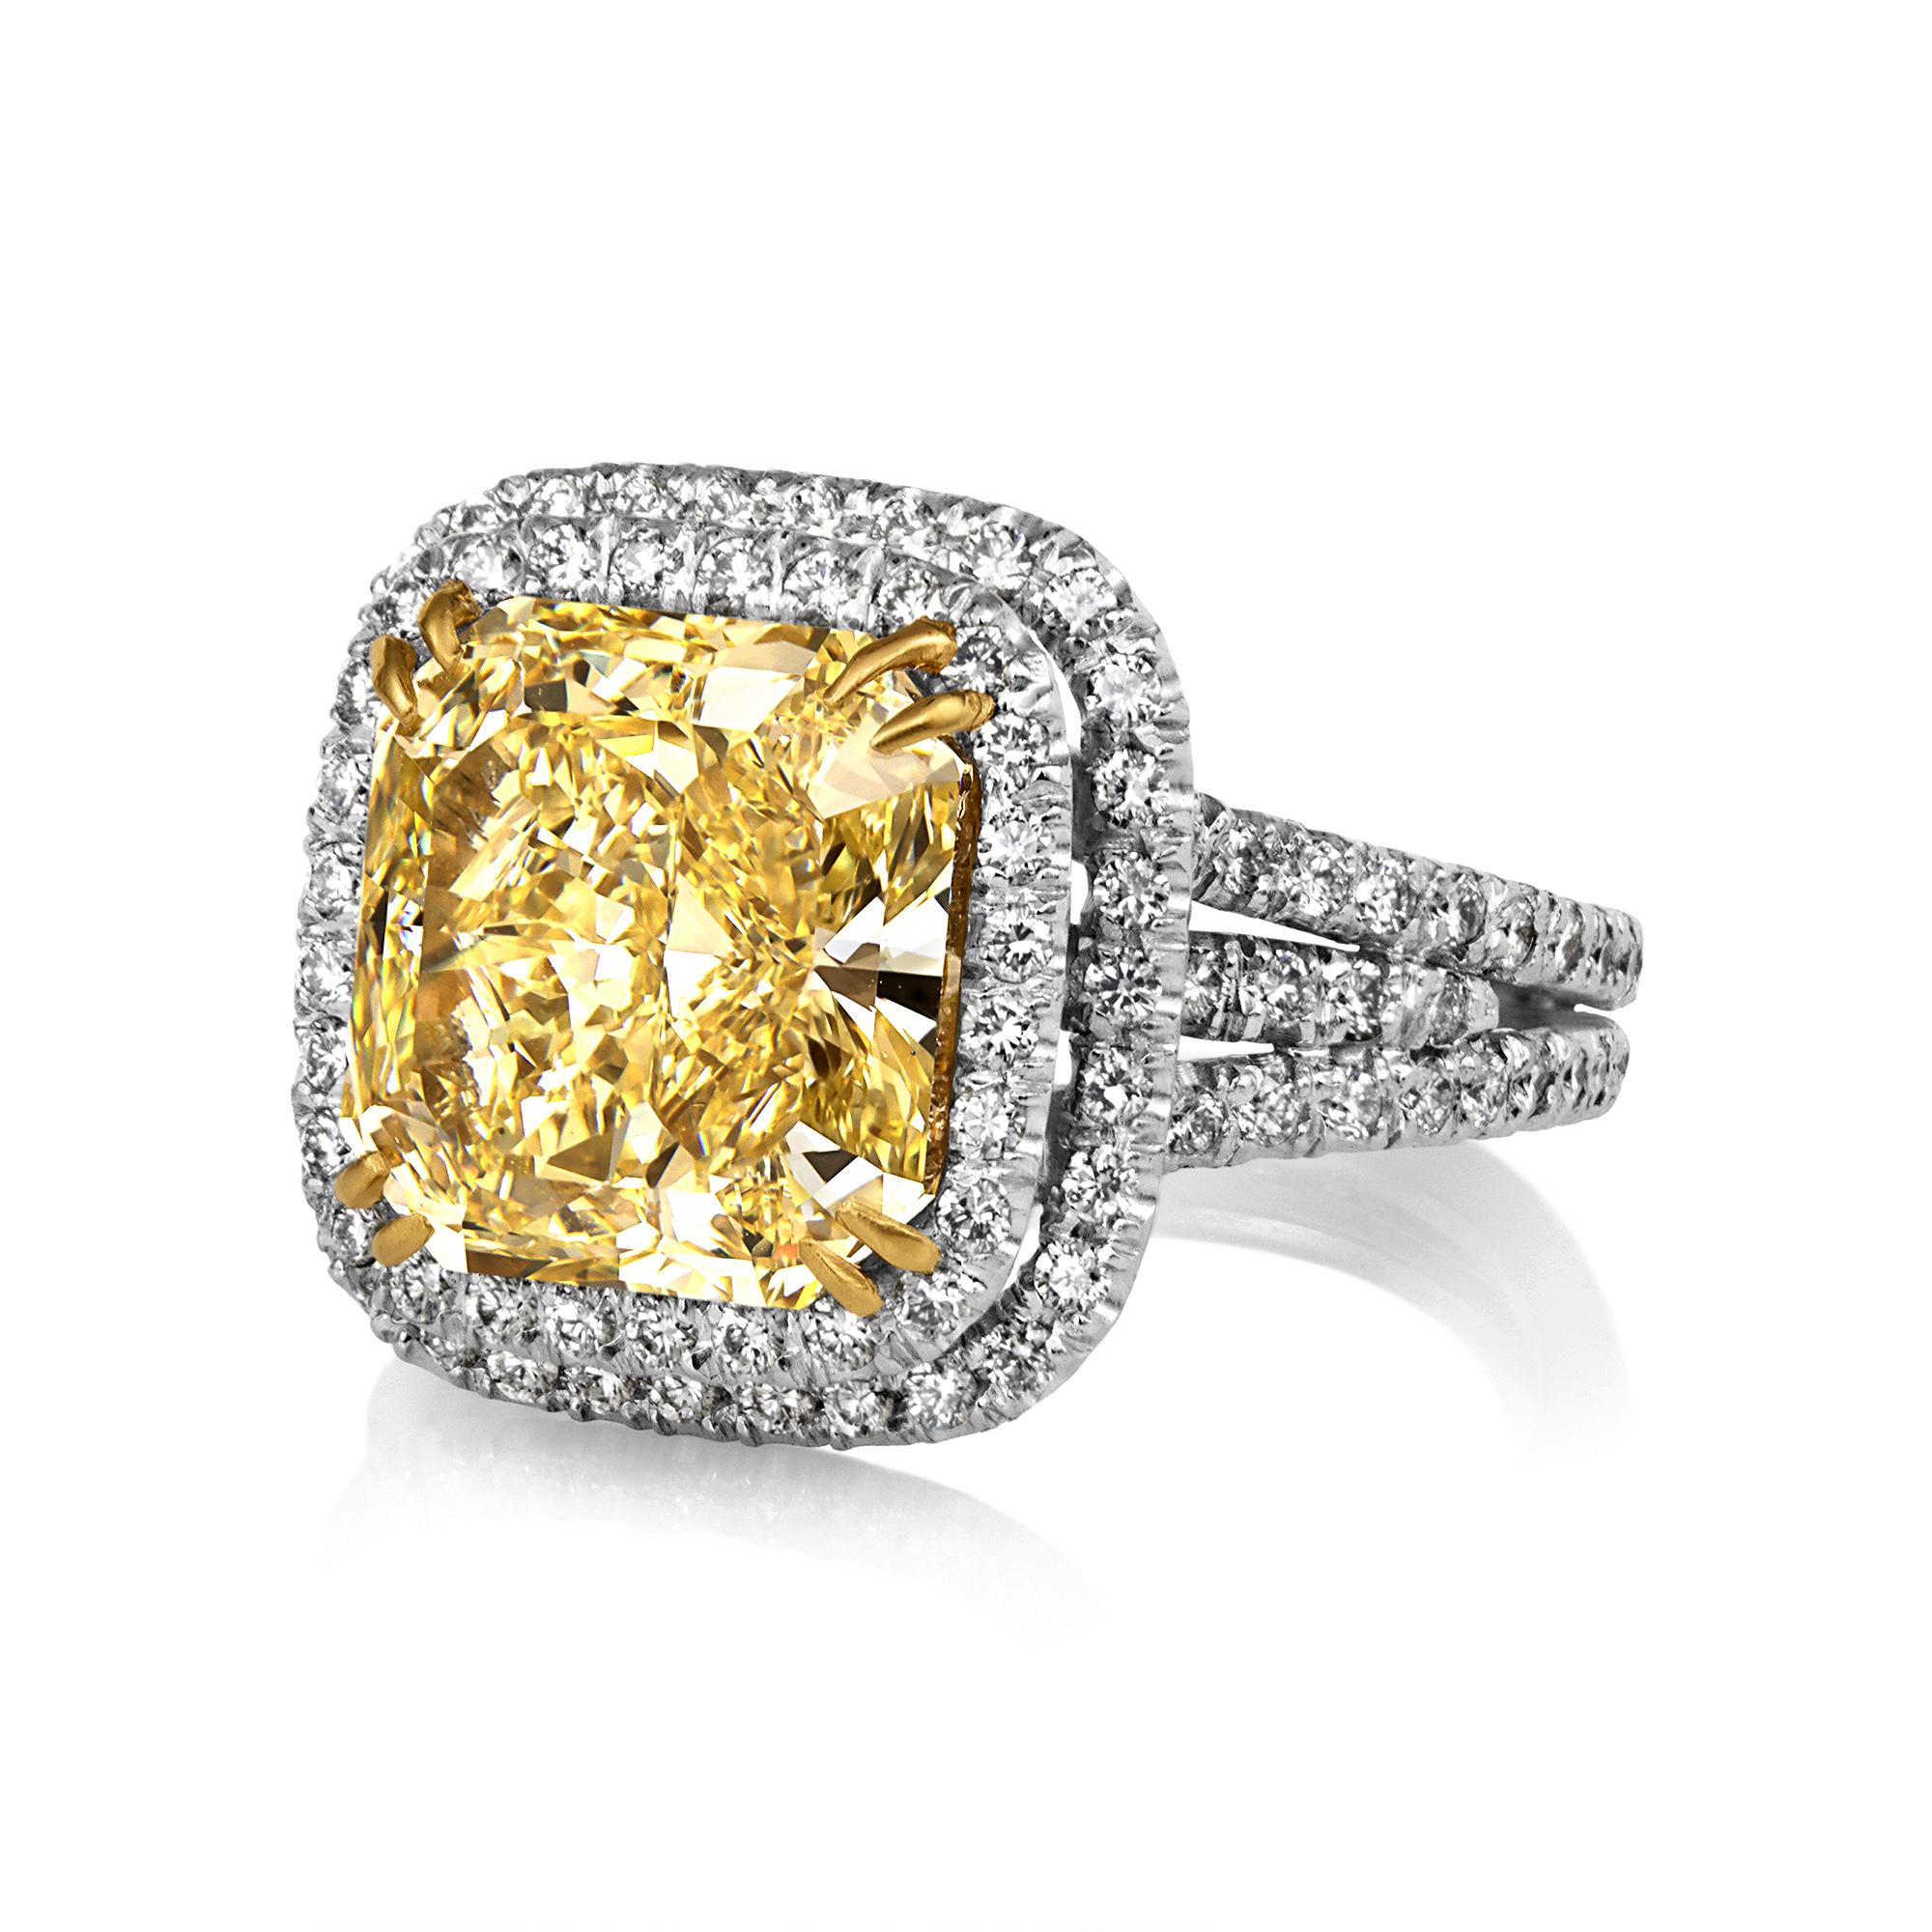 This is ring is just Beautiful! The Ultimate Luxury from our Fancy Colored Diamond Estate Collection. Beams of sunshine radiate day and night from this fabulous dazzler with gorgeous Natural Center diamond! Ignited by bright white diamonds that